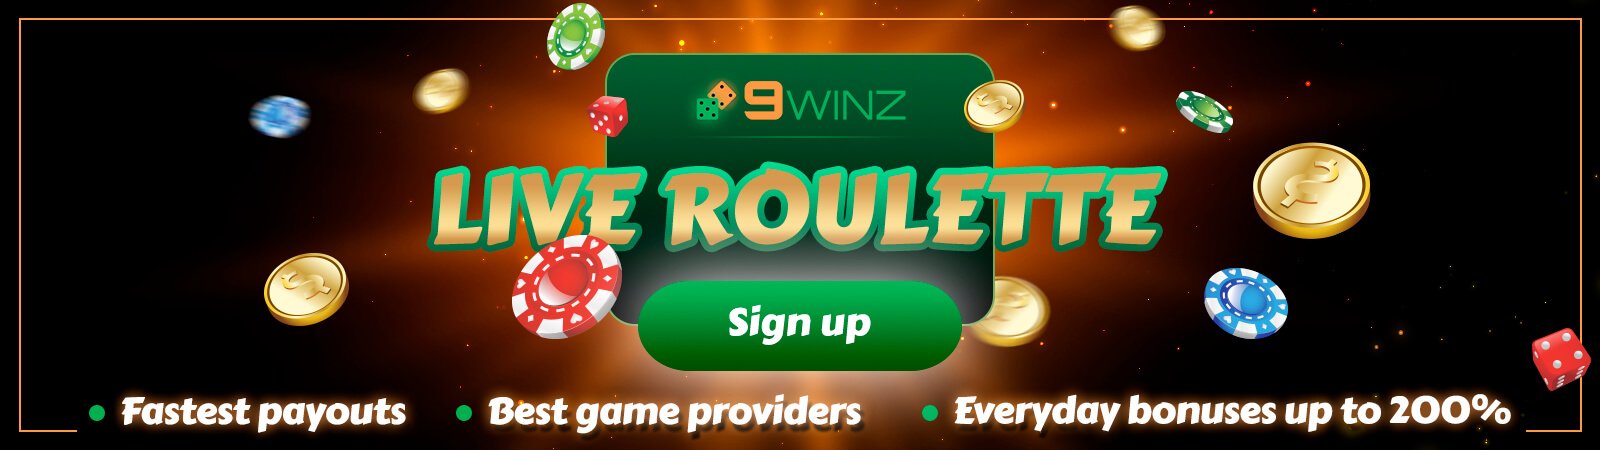 Is It Possible To Beat Roulette And Make Millions?